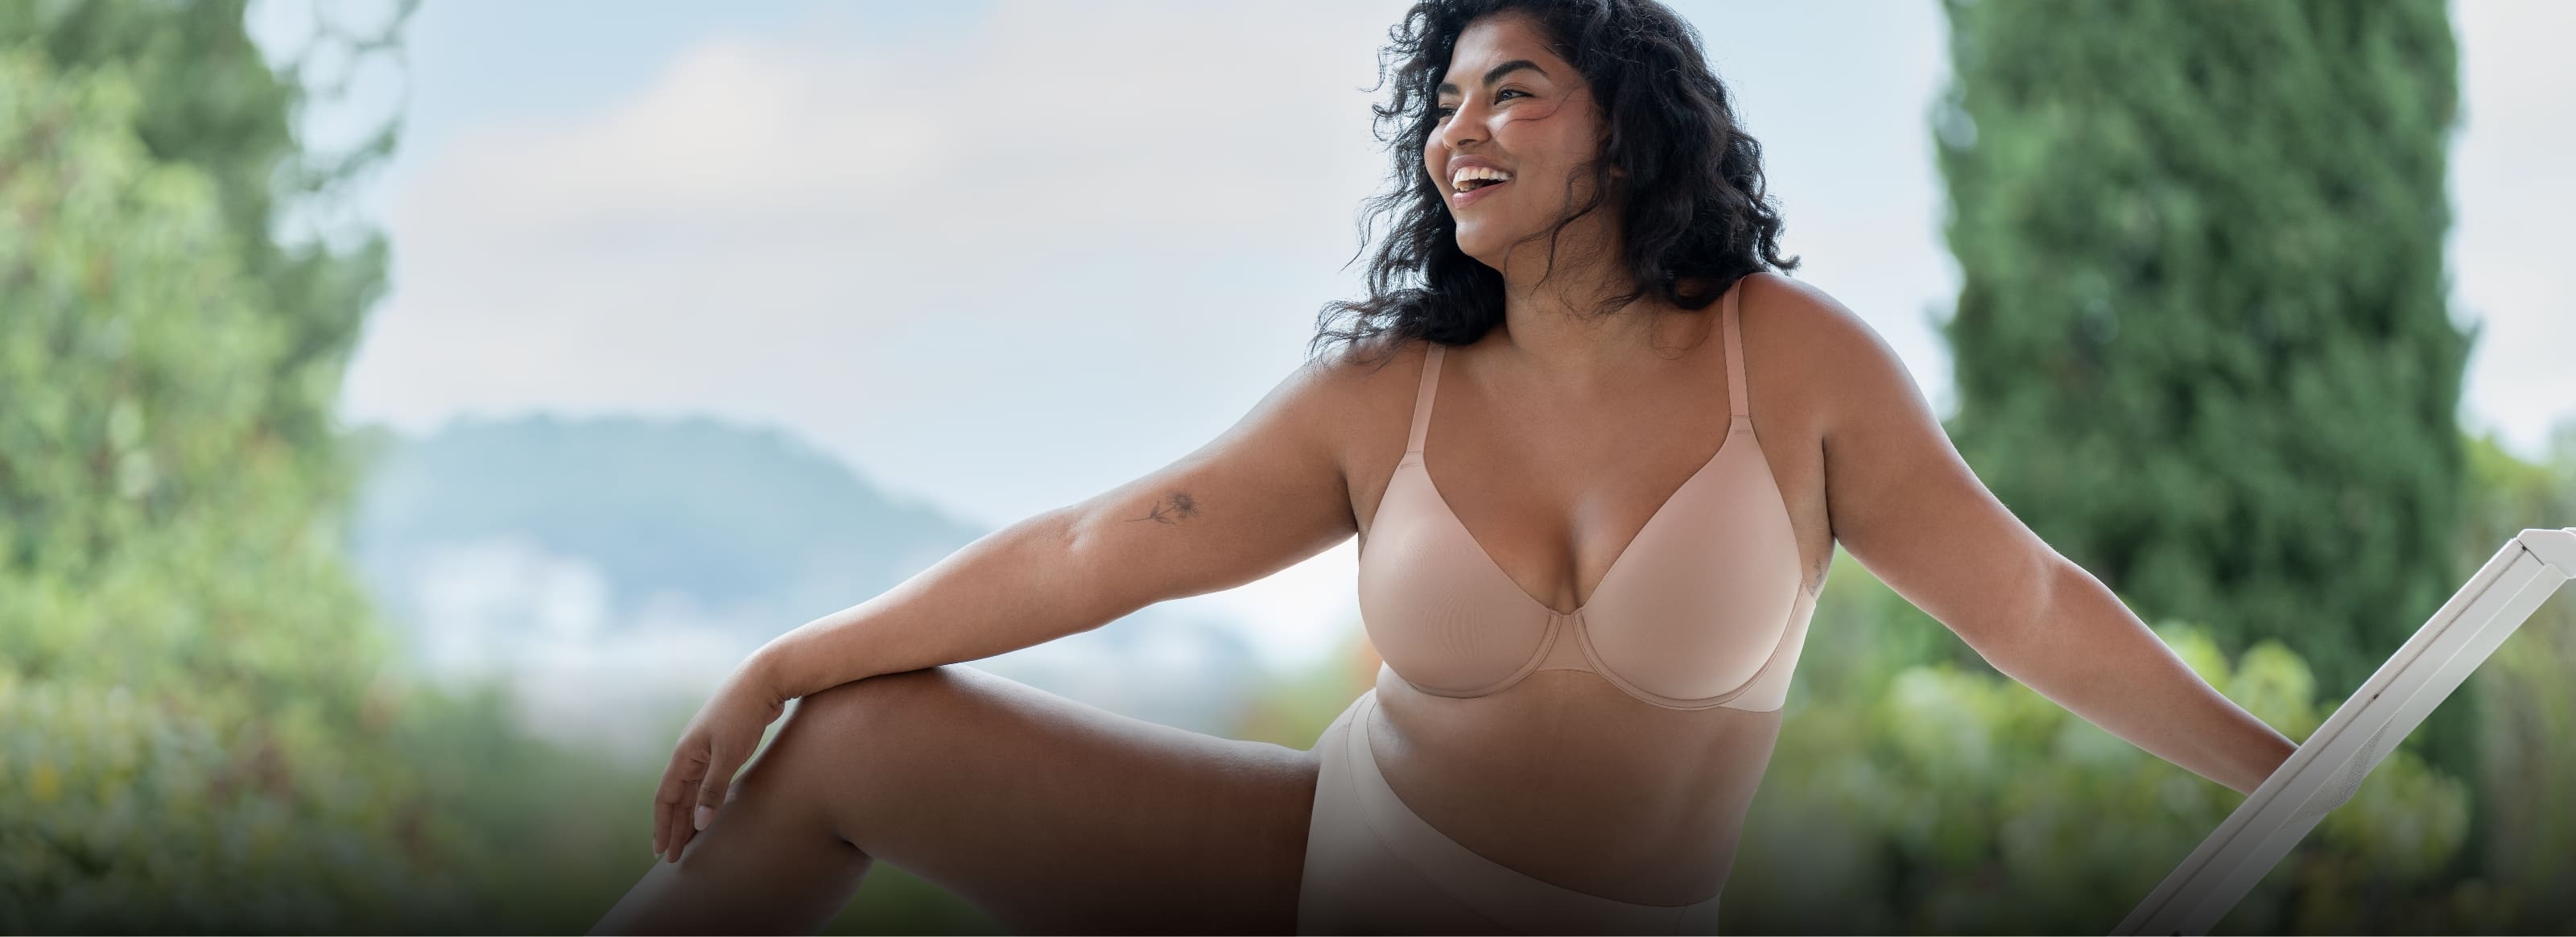 Finding your bra fit has never been easier using the Wacoal Find Your Fit Calculator.